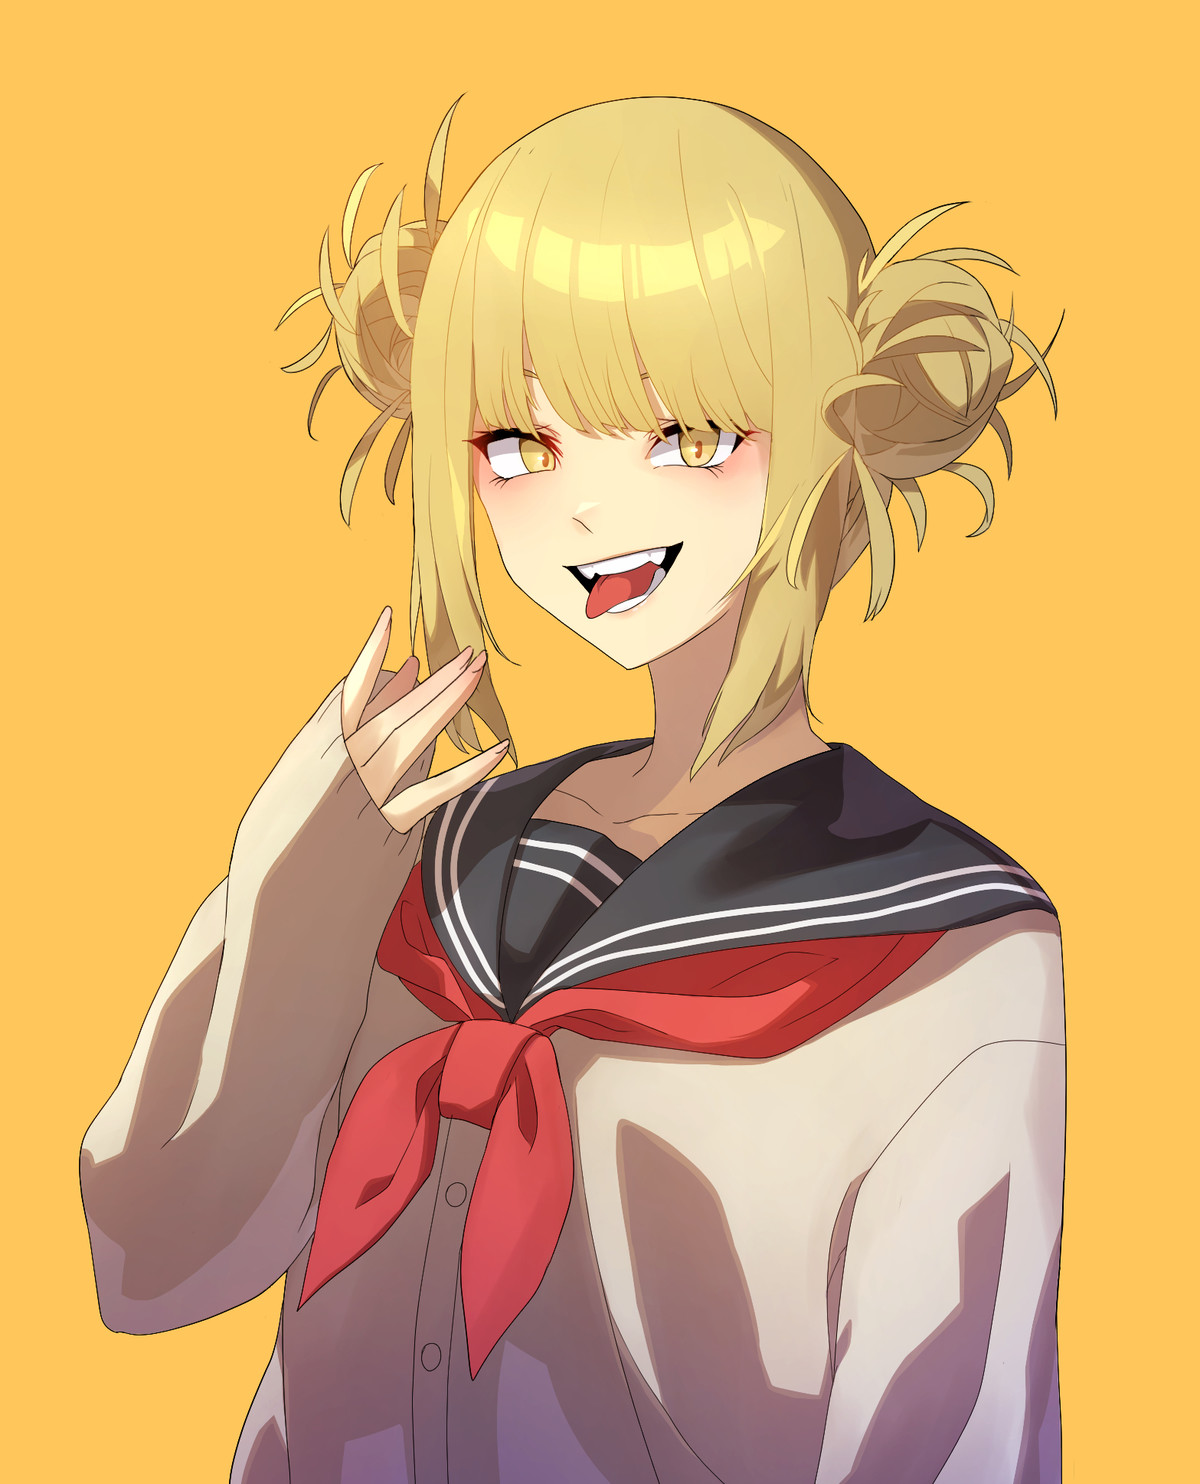 Daily Toga - 924: Just Toga. join list: DailyToga (477 subs)Mention History Source: .. Just cute